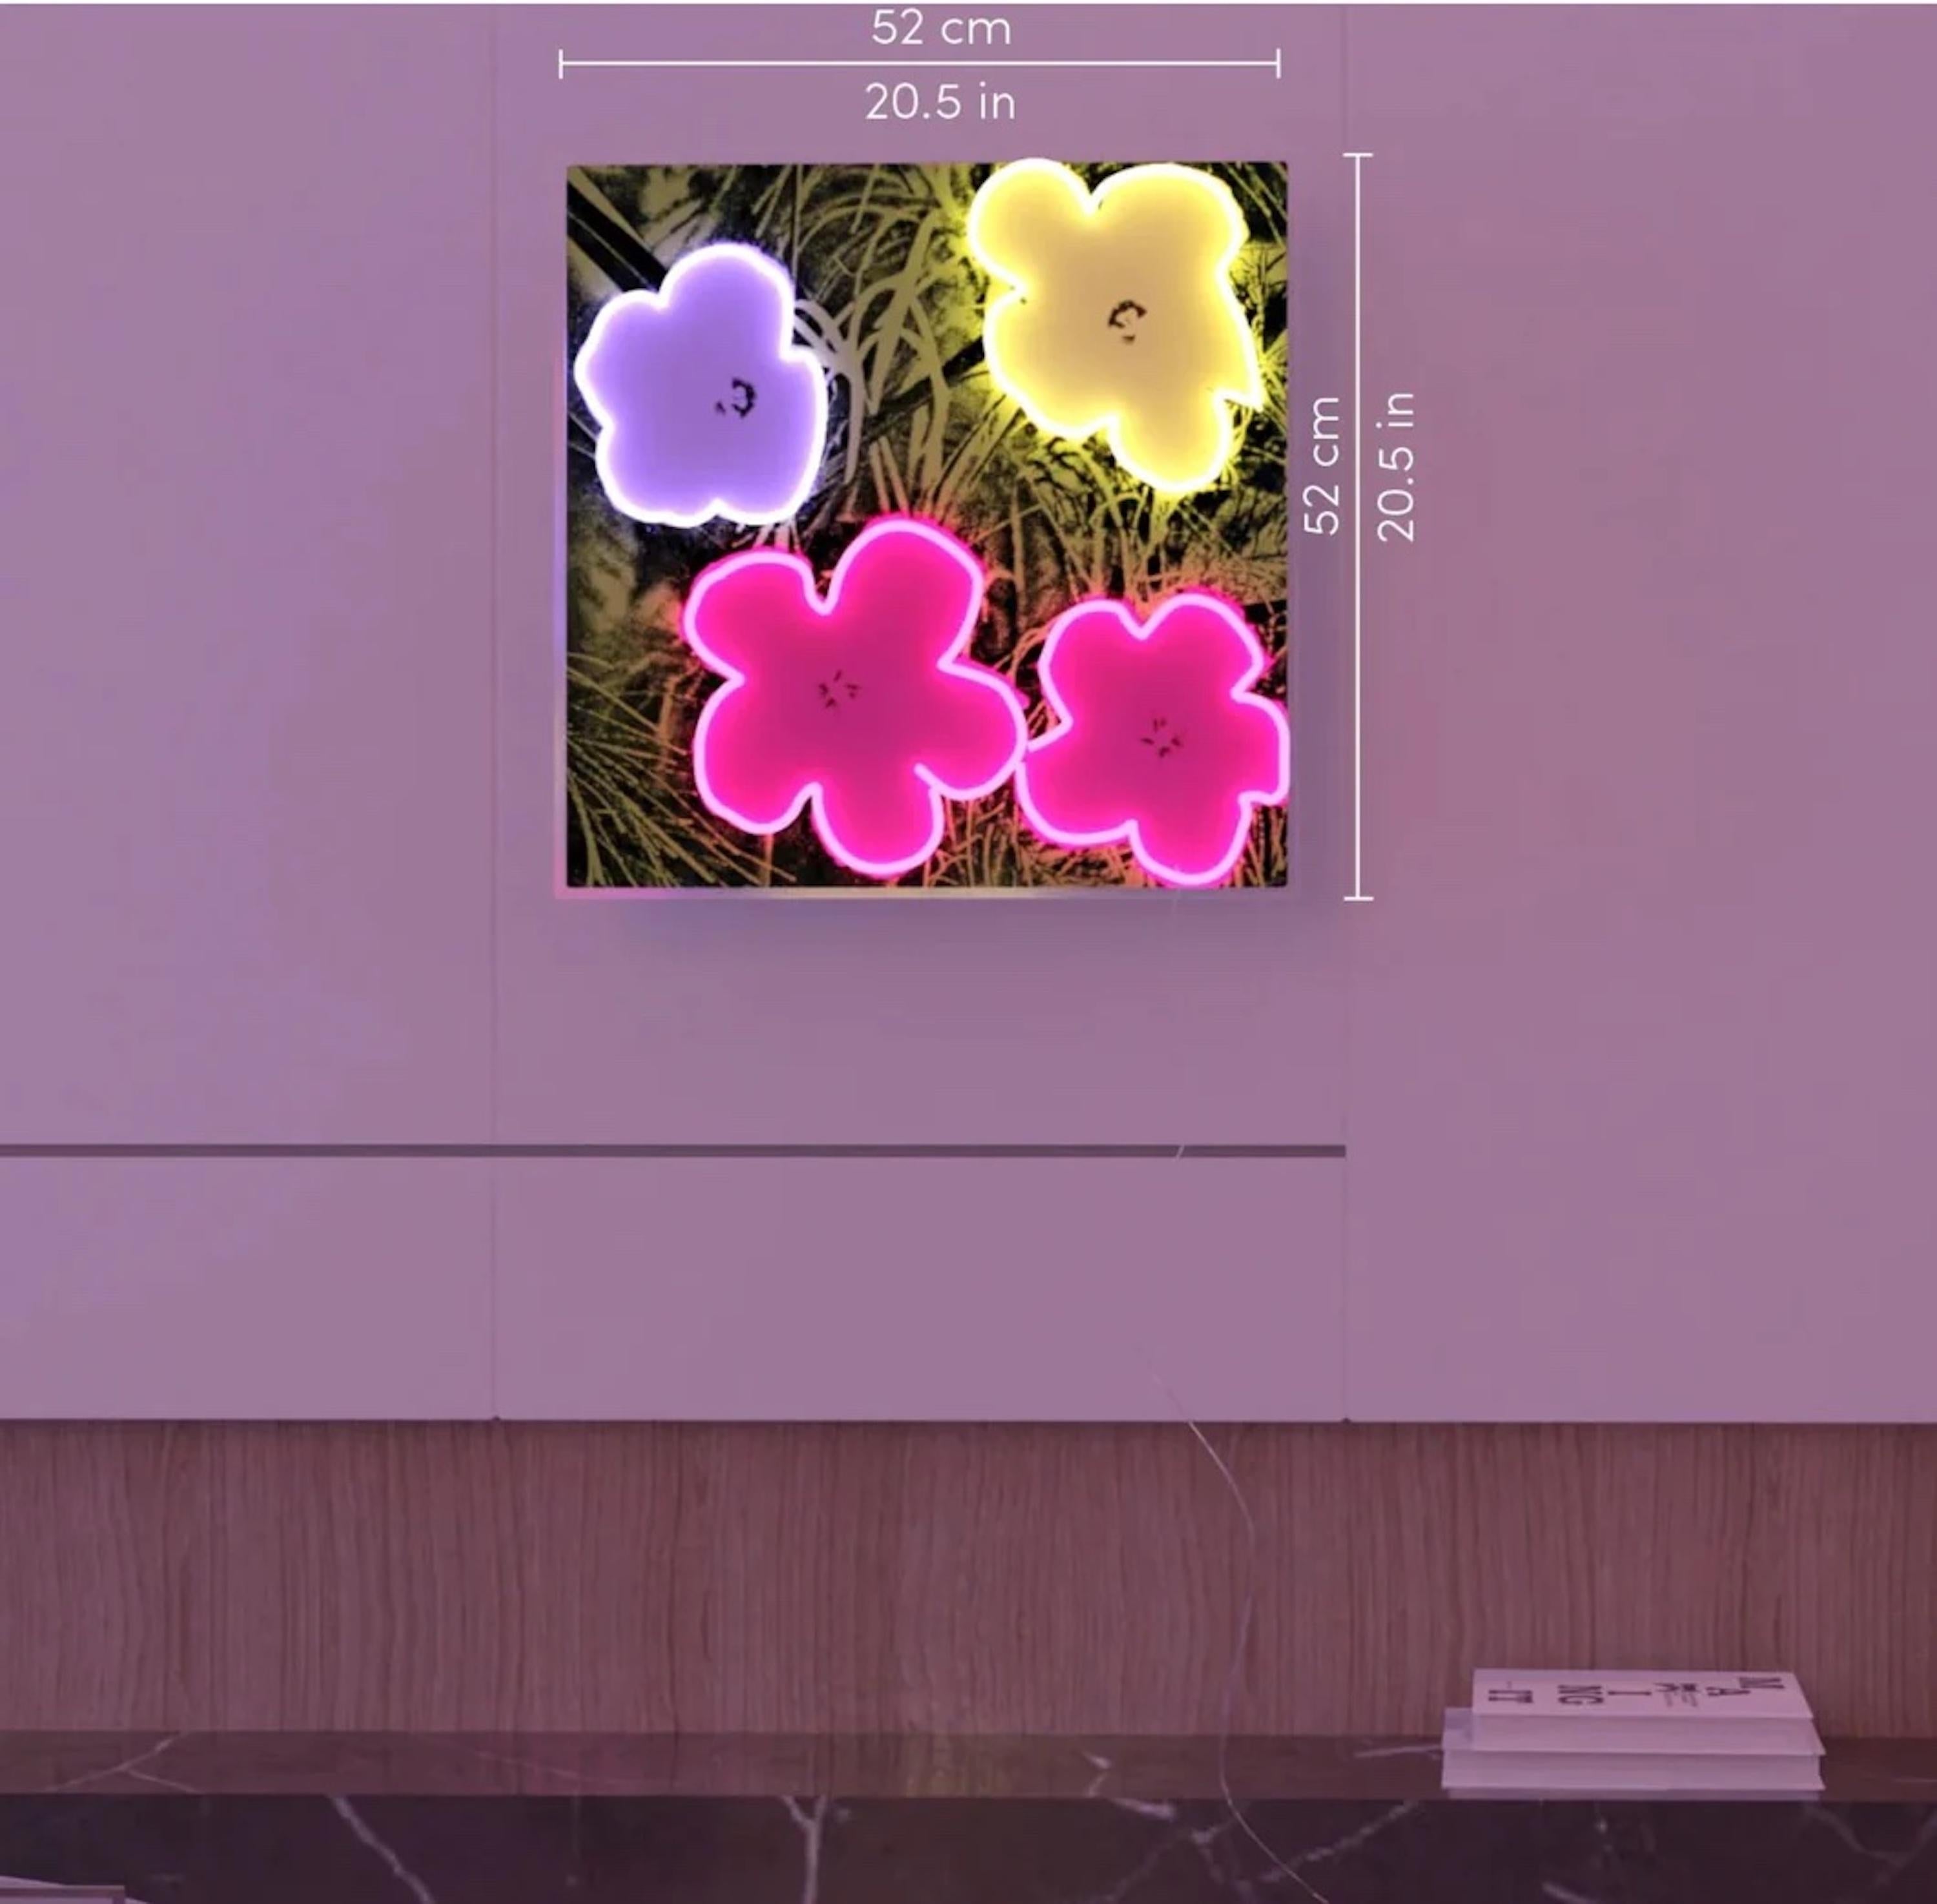 Andy Warhol
Neon Flowers lighted Wall Hanging/Sign, 2022
Neon flex material, consisting of PVC or Silicon piping with LED lights mounted on a recycled acrylic board
Box is plate signed; accompanied by official numbered COA authorized by the Warhol